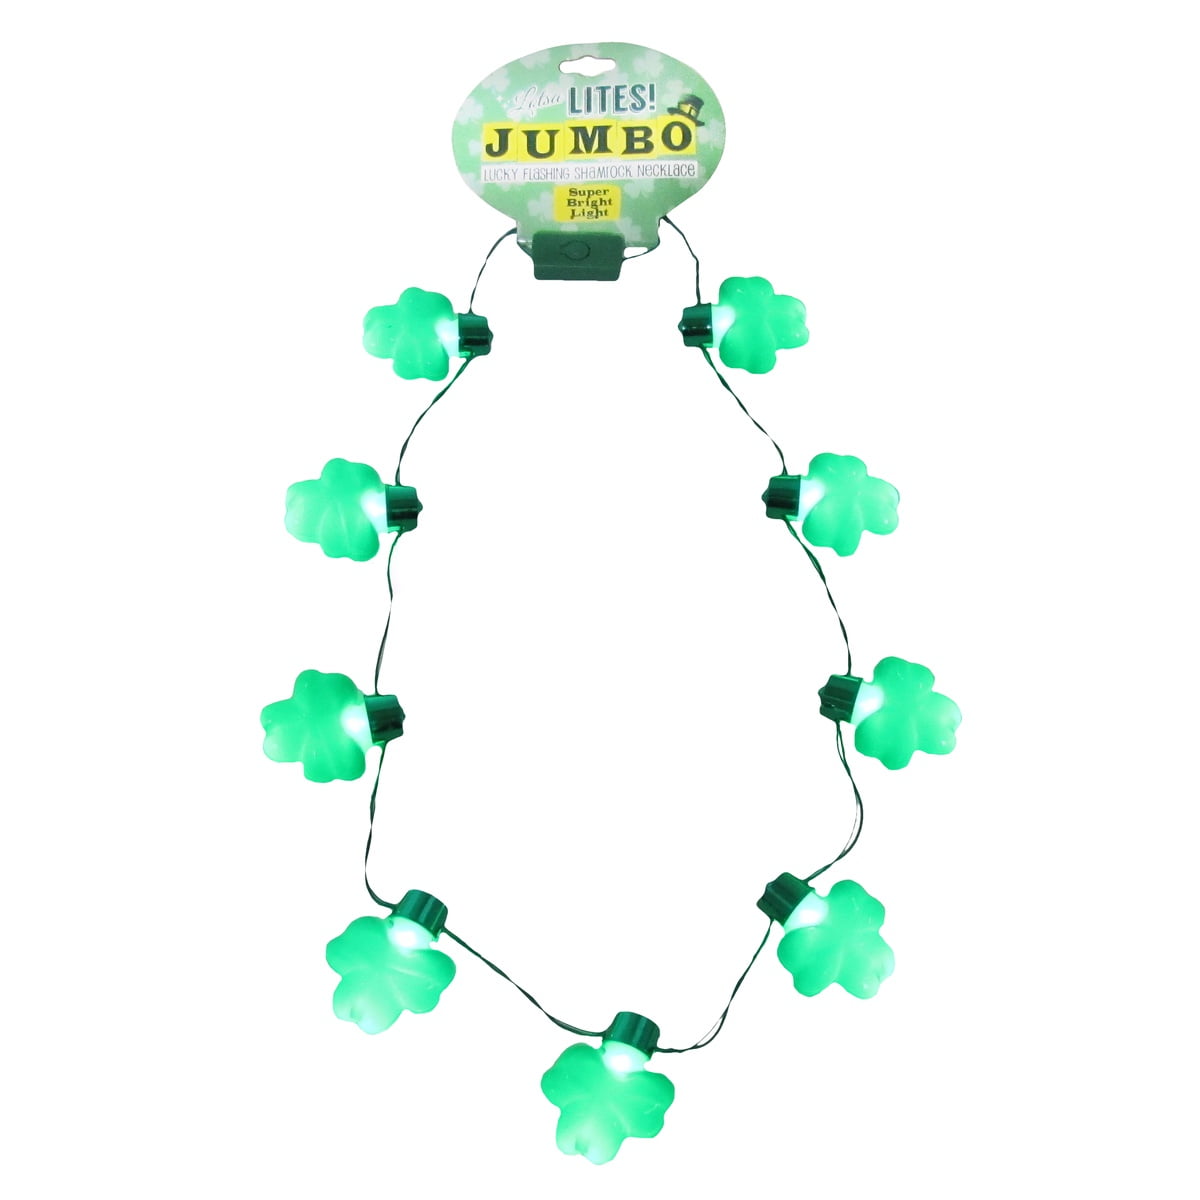 Details about   St Patrick's Day Kiss Me Shamrock LED Bulb Necklace Glowing Clover Party Novelty 